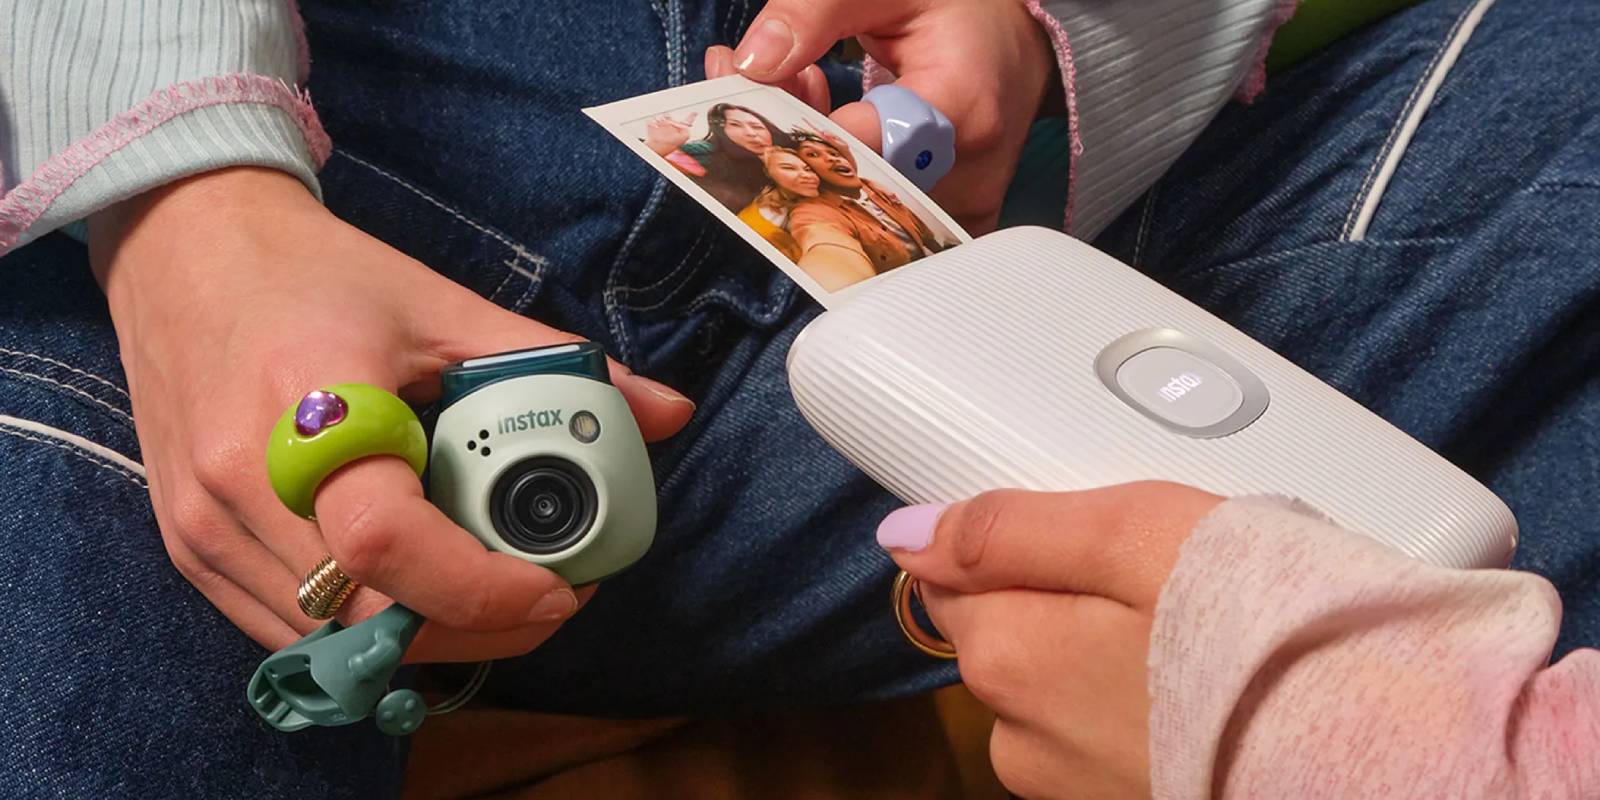 INSTAX Pal is Fujifilm's new camera that fits in the palm of your